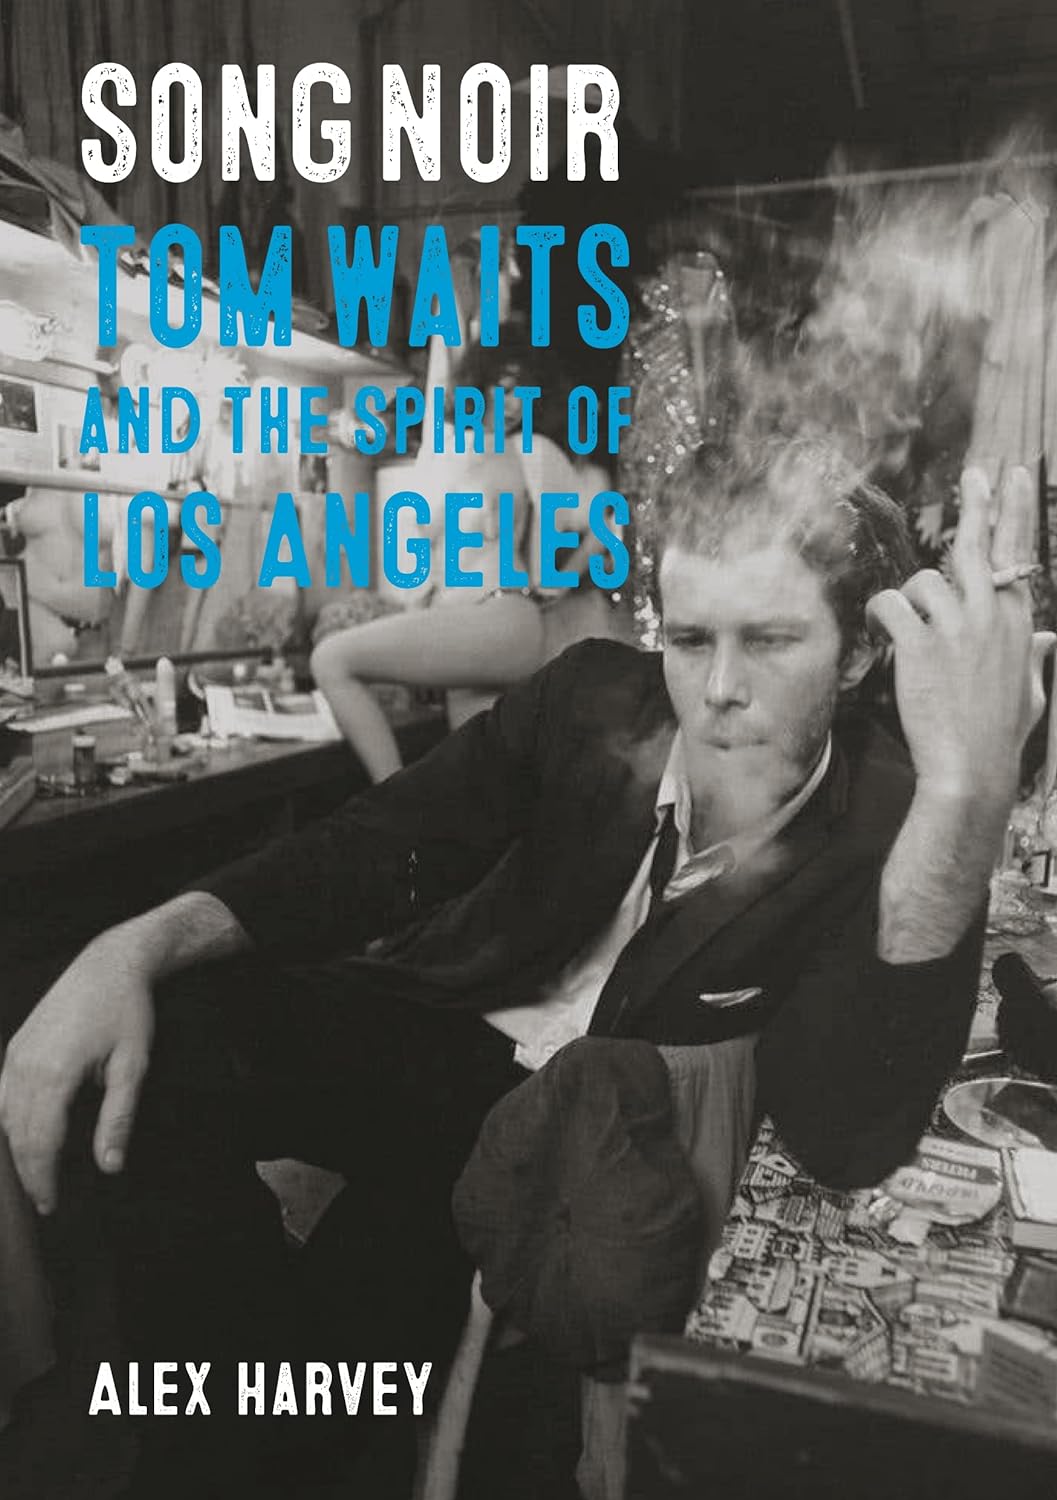 Waits, Tom - Harvey, Alex - Song Noir: Tom Waits And The Spirit Of Los Angeles - Book - New